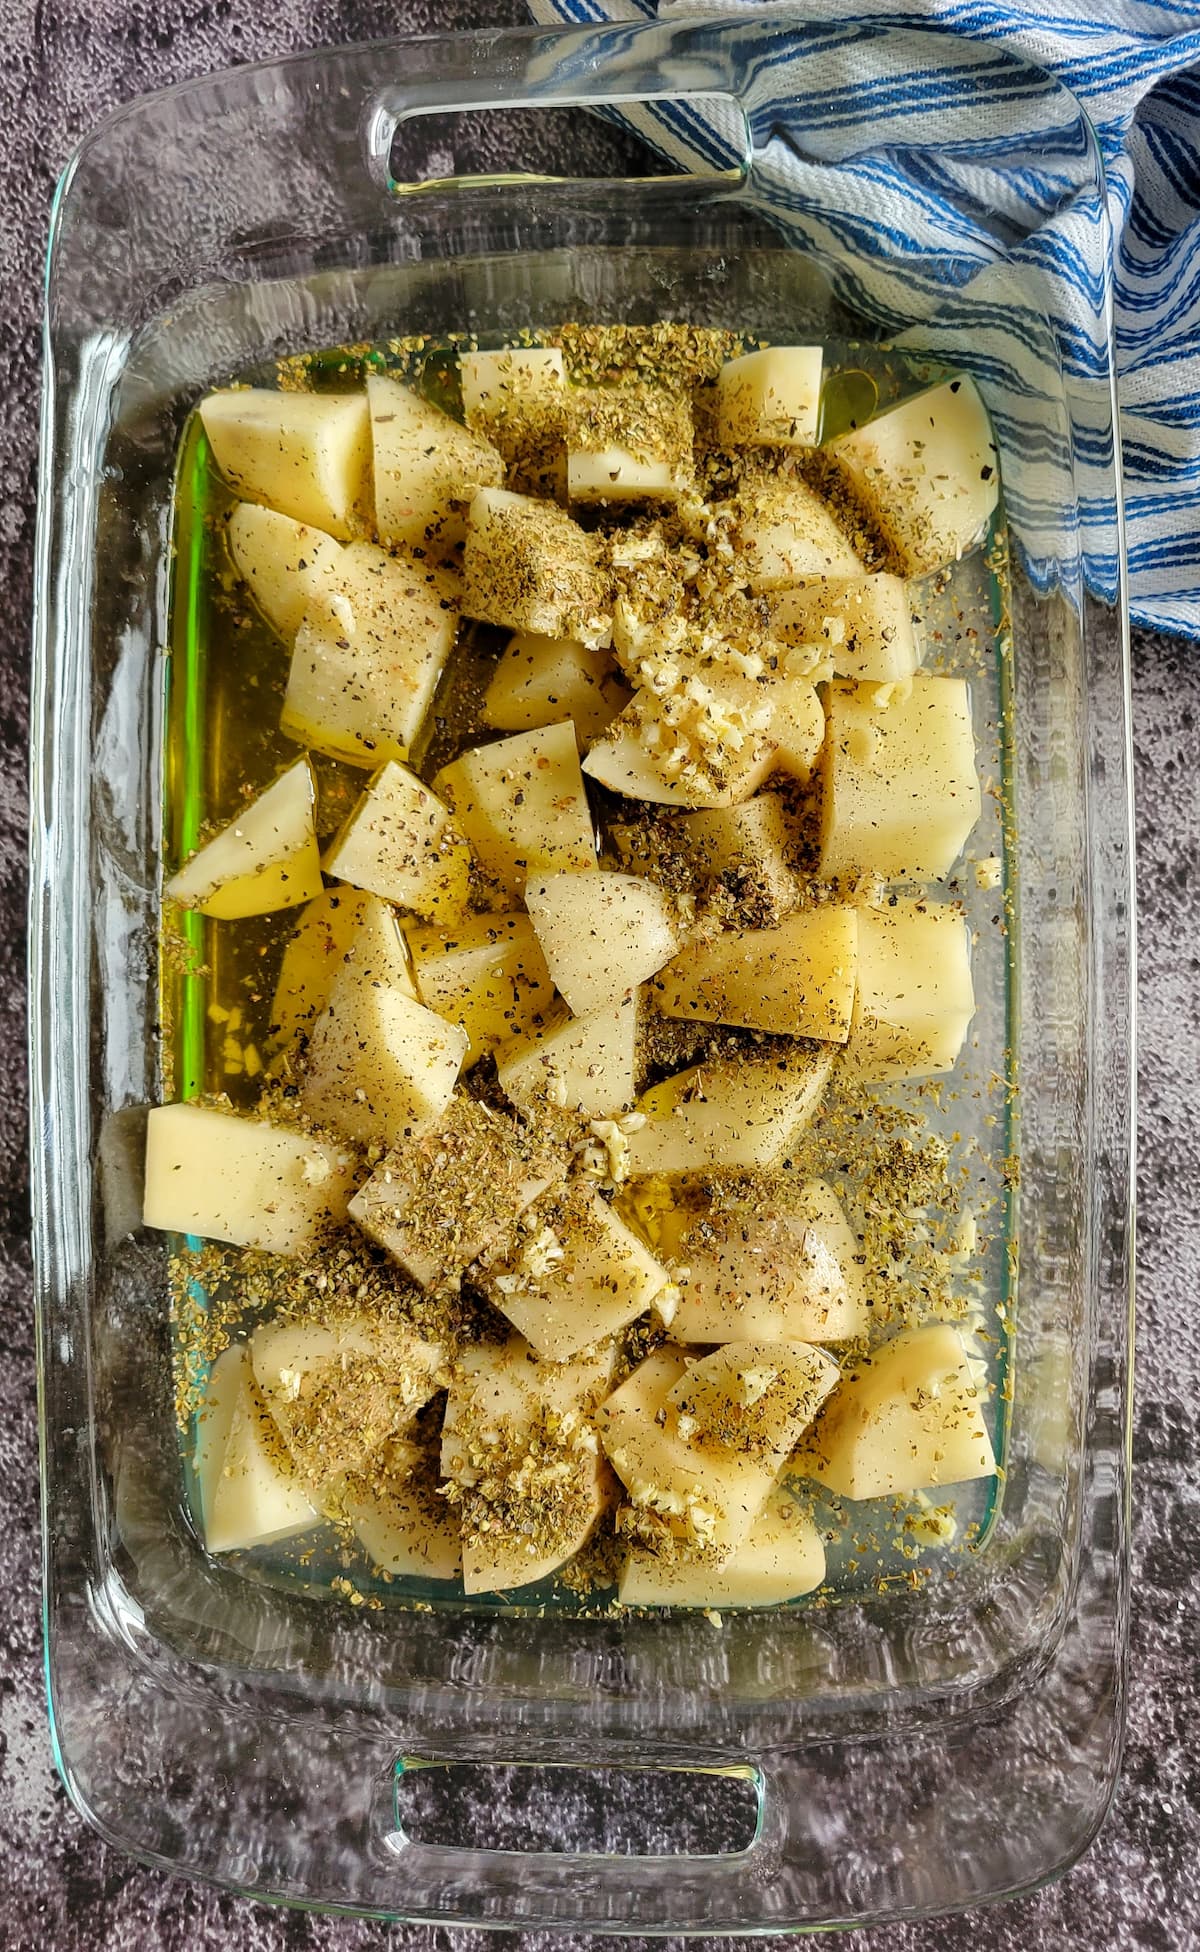 raw potato chunks in a casserole dish with minced garlic, oregano, olive oil and water